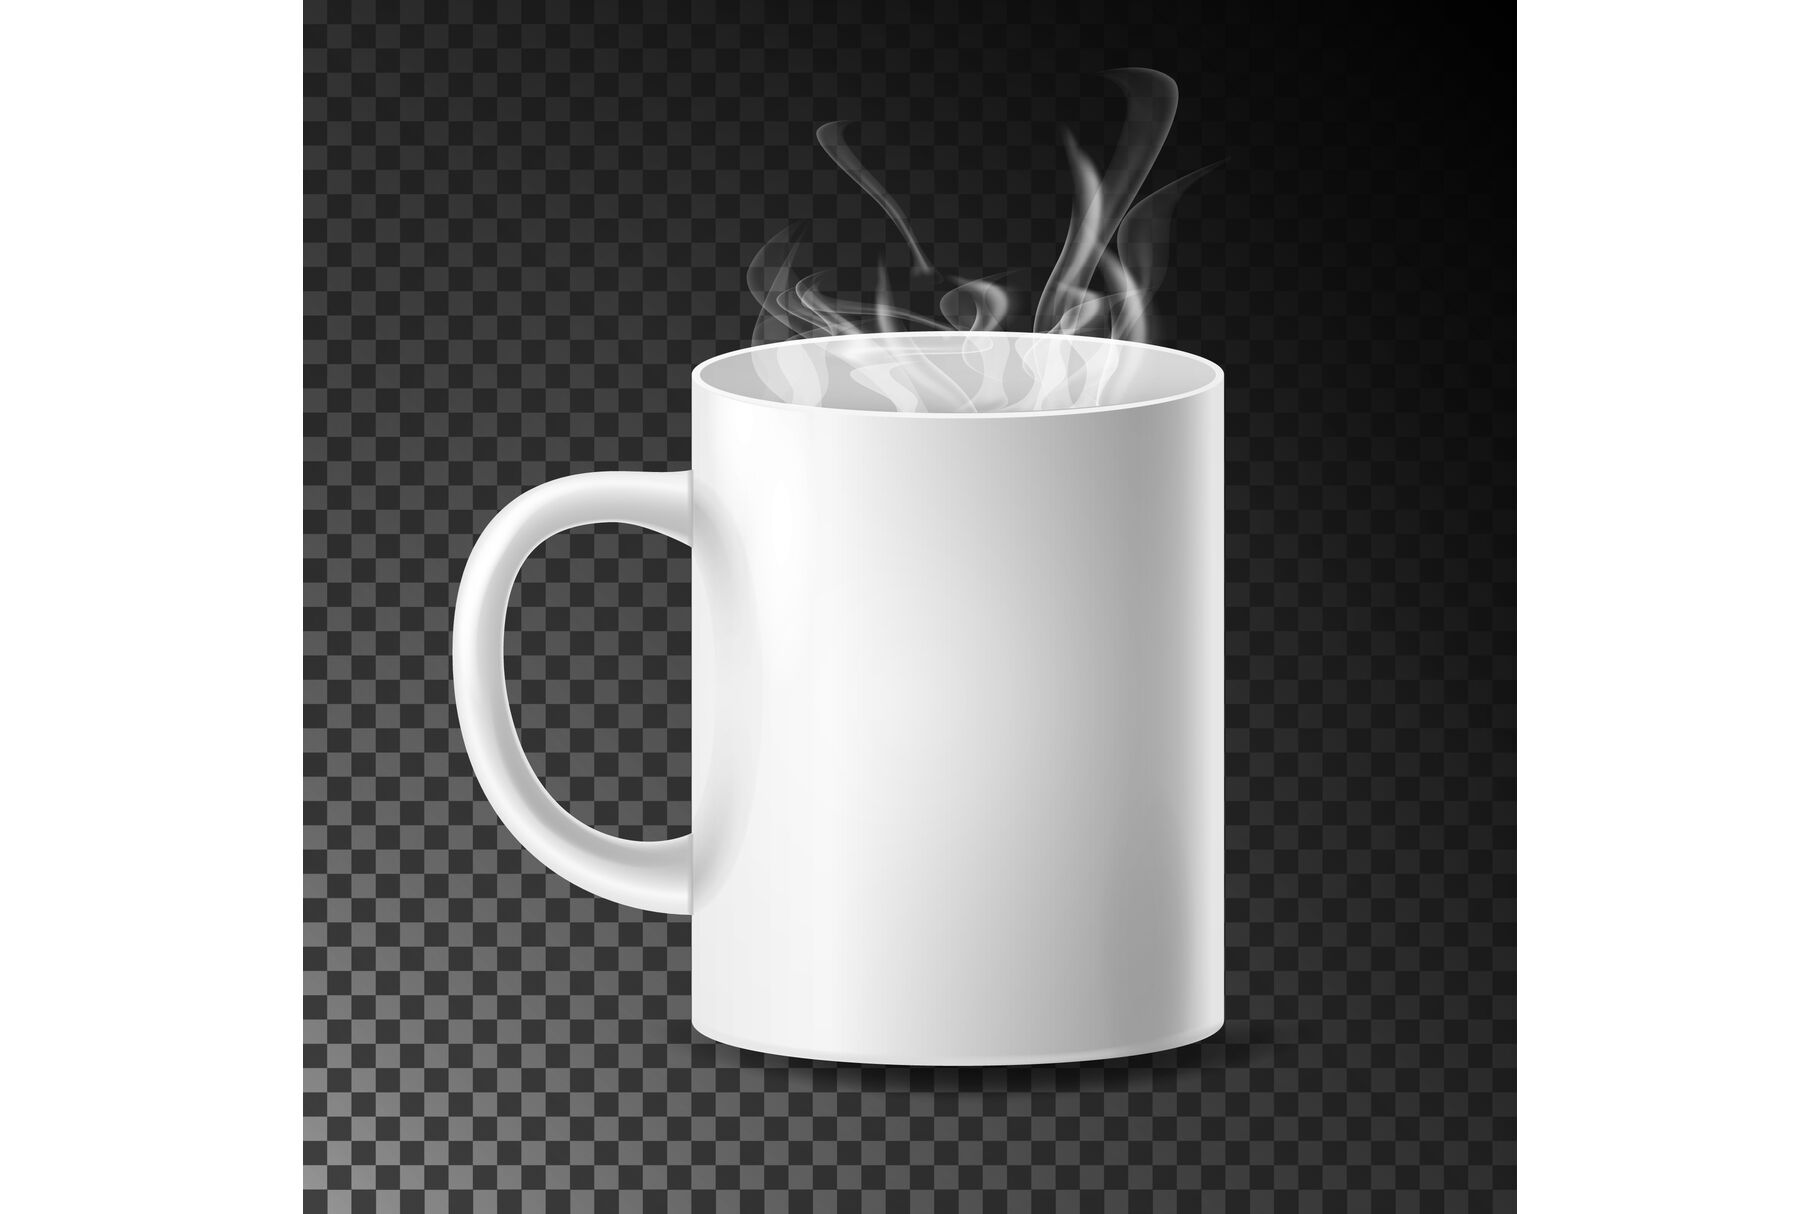 https://media1.thehungryjpeg.com/thumbs2/ori_3747609_m9dl8wtzcq0nehe25bdxm1tktfu9e7pvxyxuxsdi_white-cup-mug-vector-realistic-ceramic-or-plastic-cup-isolated-on-transparent-background-empty-classic-cafe-cup-with-handle-and-steam-illustration-good-for-business-branding-corporate-identity.jpg